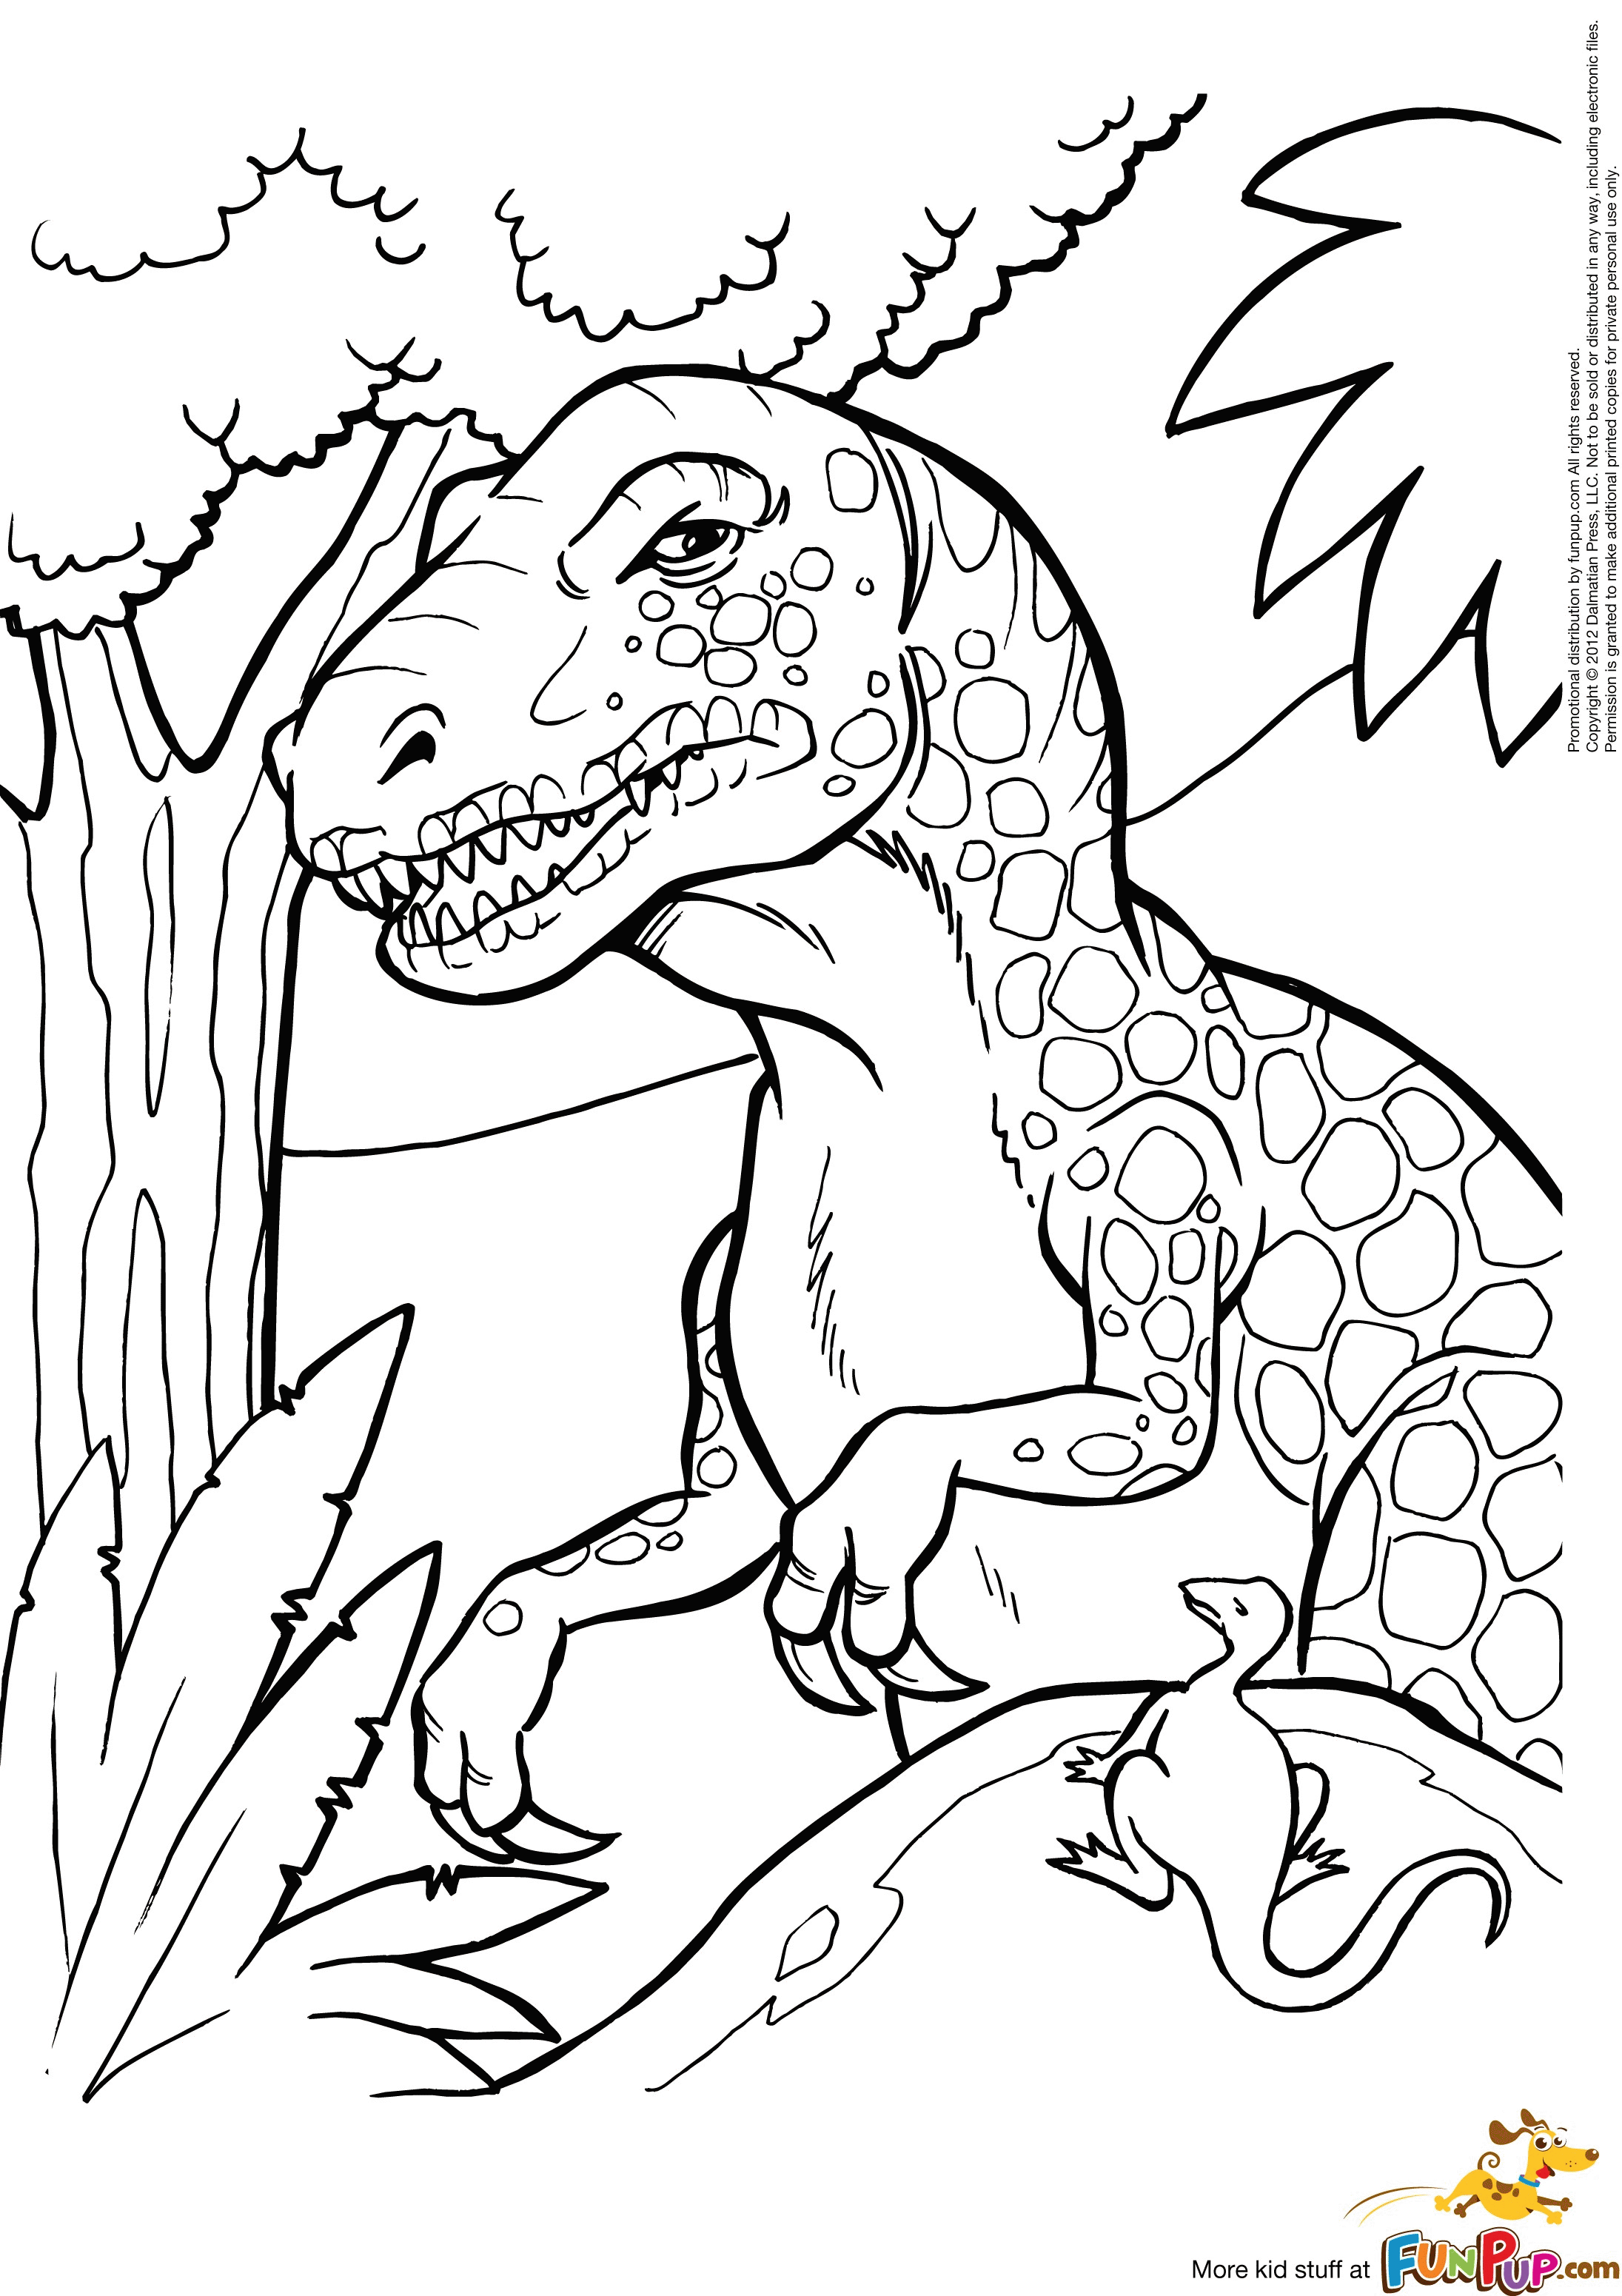 T Rex Coloring Pages to print T Rex Coloring Pages